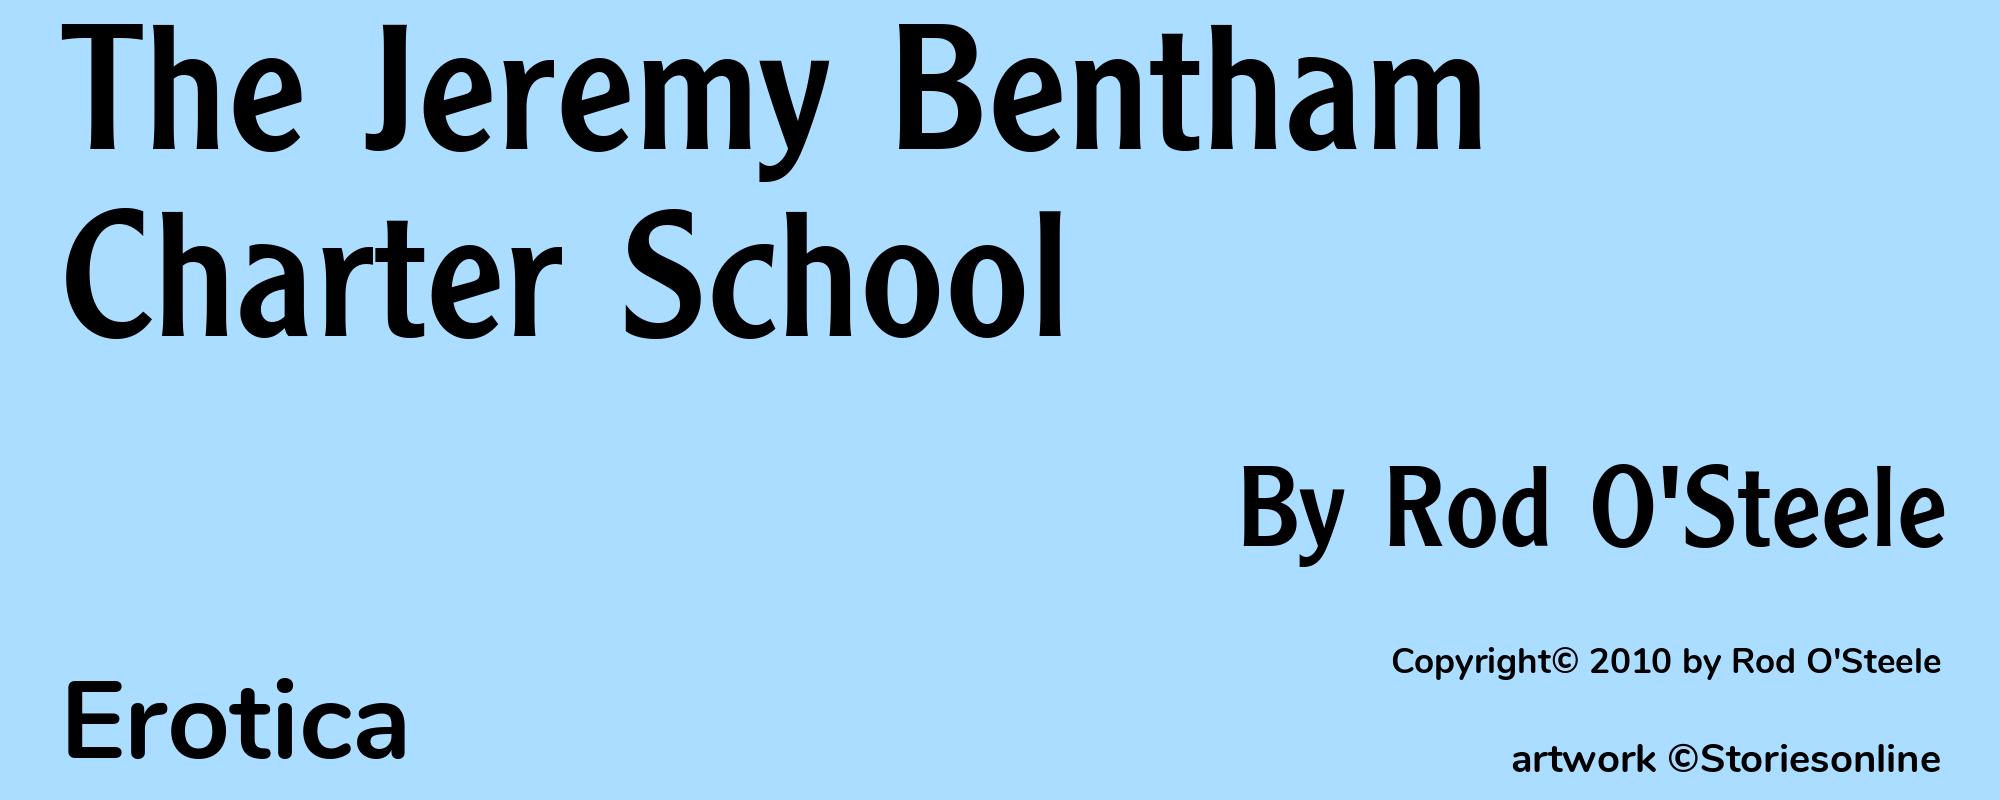 The Jeremy Bentham Charter School - Cover